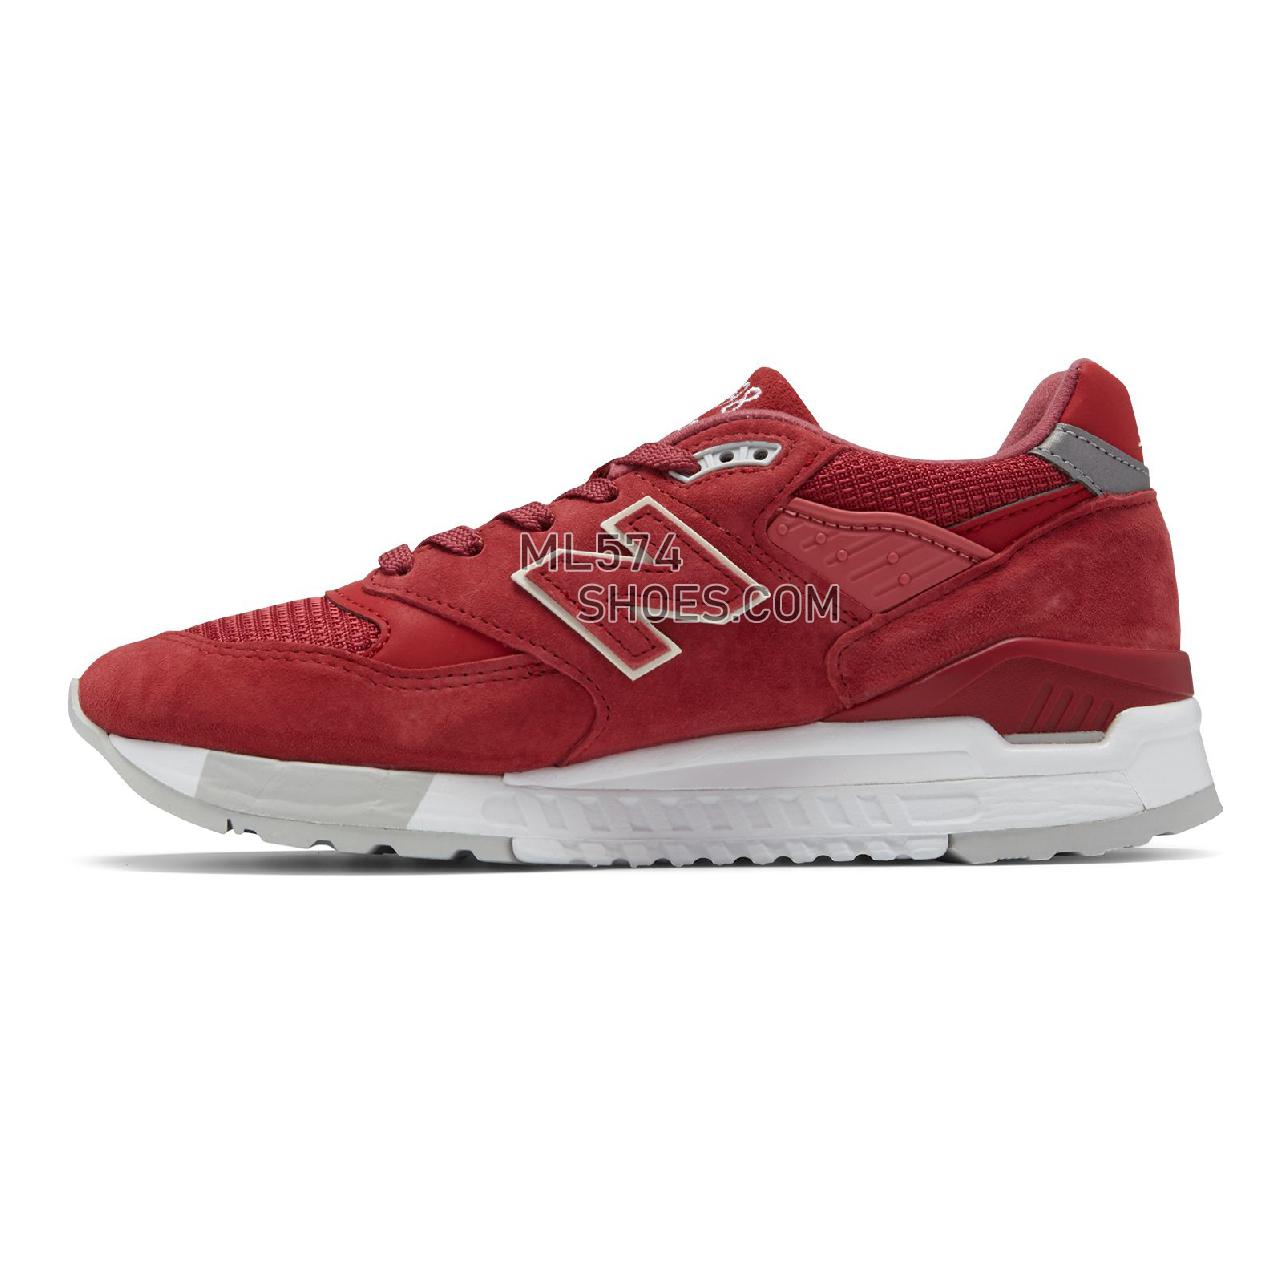 New Balance 998 Made in US - Women's 998 - Classic Red with White - W998RBE